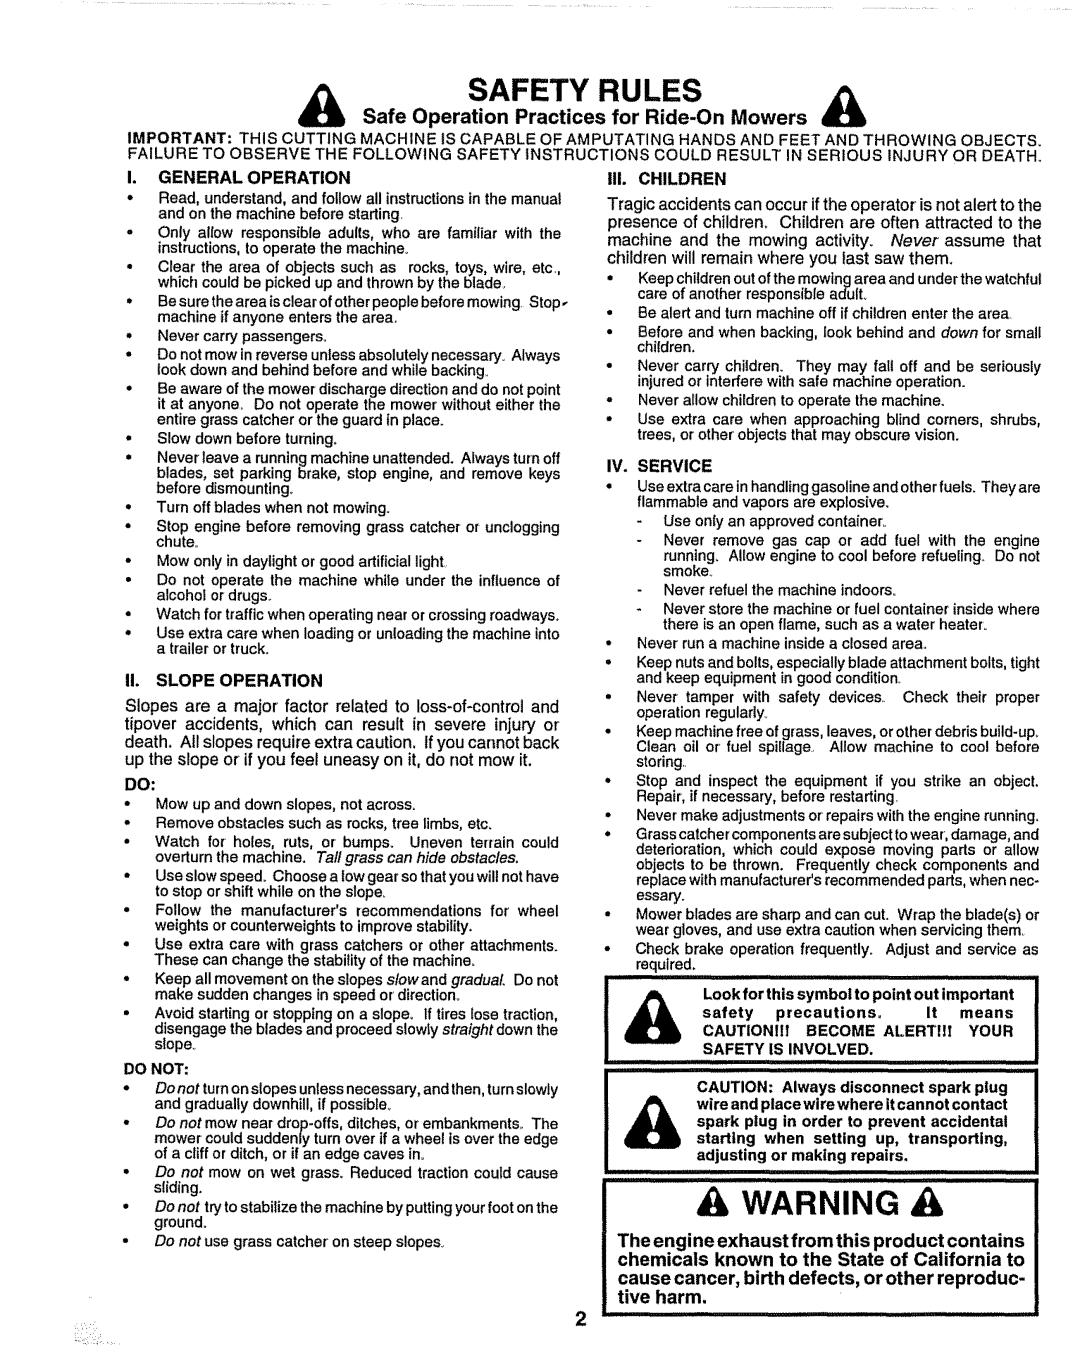 Craftsman 917.259172 Safety Rules, Safe Operation Practices for Ride-OnMowers, I.General Operation, Ii.Slope Operation 